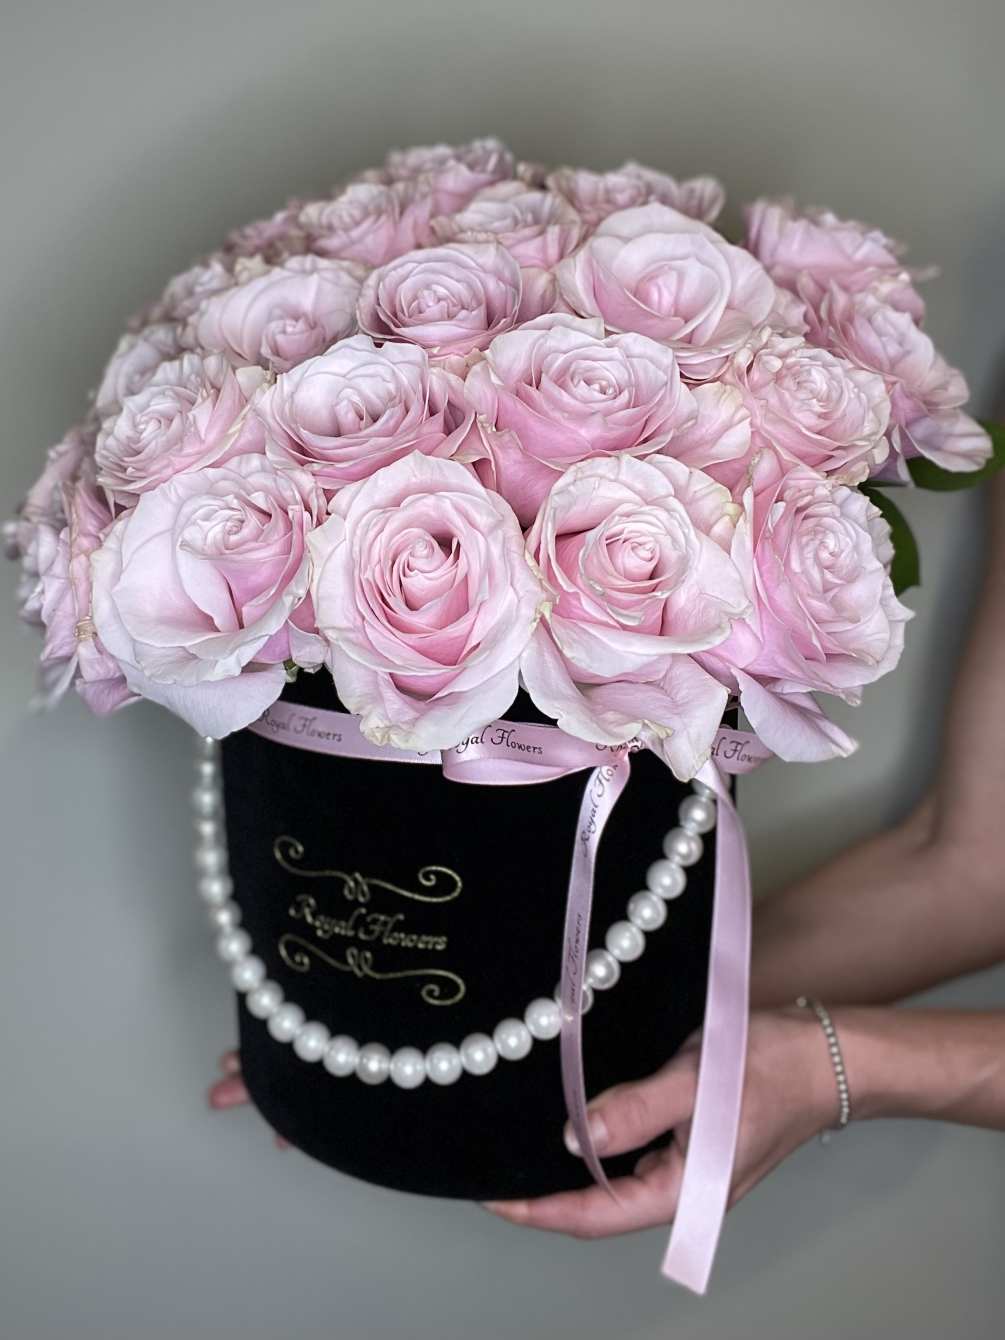 2 dozens roses in a signature velvet box with a pearl handle.